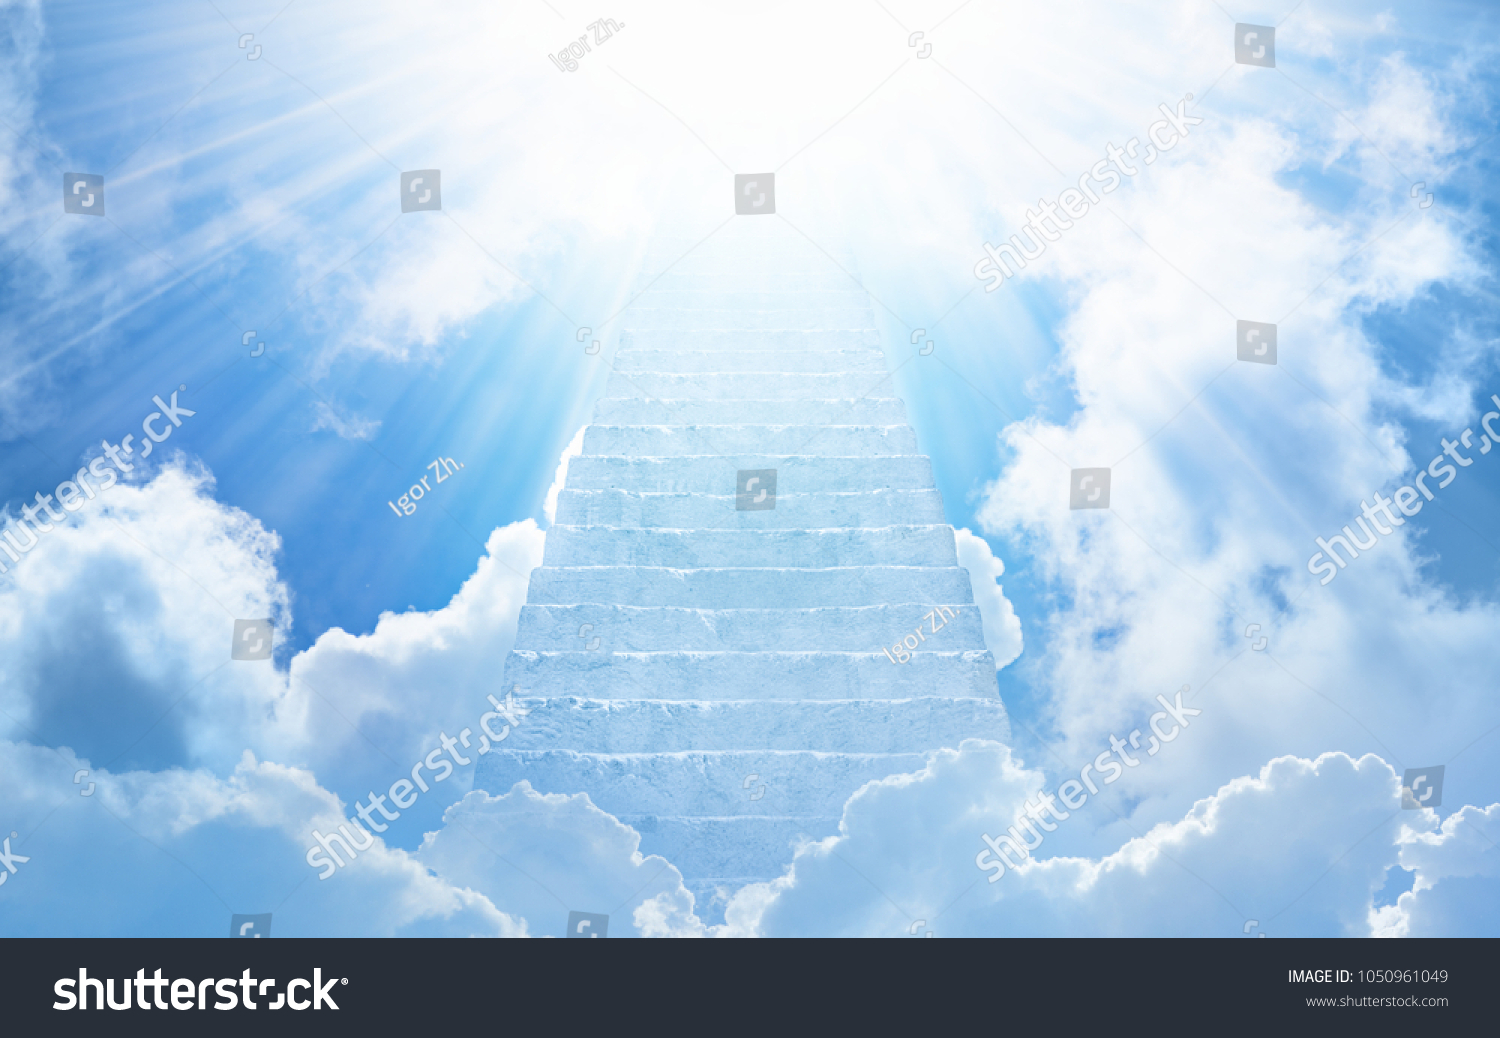 Beautiful religious background - stairs to heaven, bright light from heaven, stairway leading up to skies #1050961049